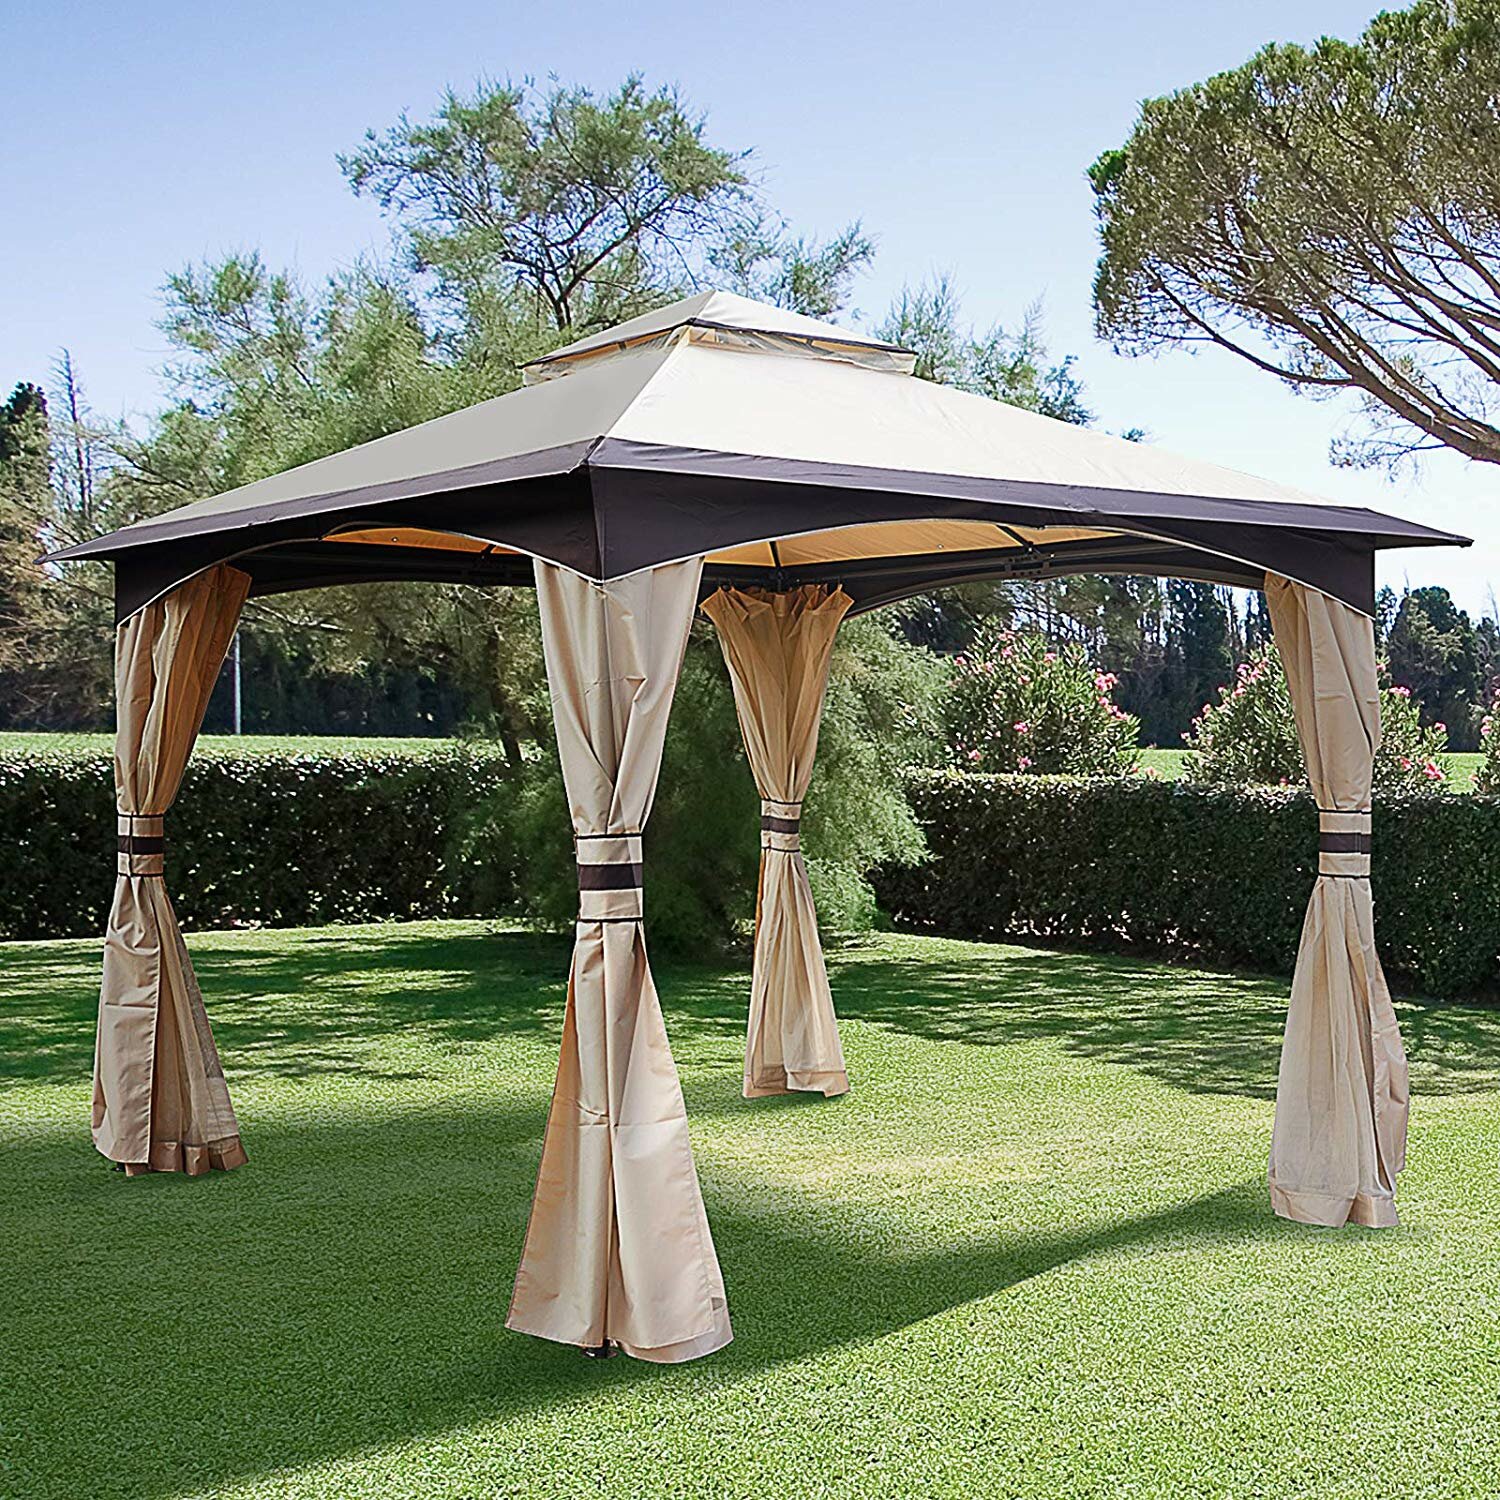 Angel Living Replacement Top Cover Roof for 3X3M Garden Metal Gazebo 1 Tier Gazebo Roof Replacement Tent Canopy Beige